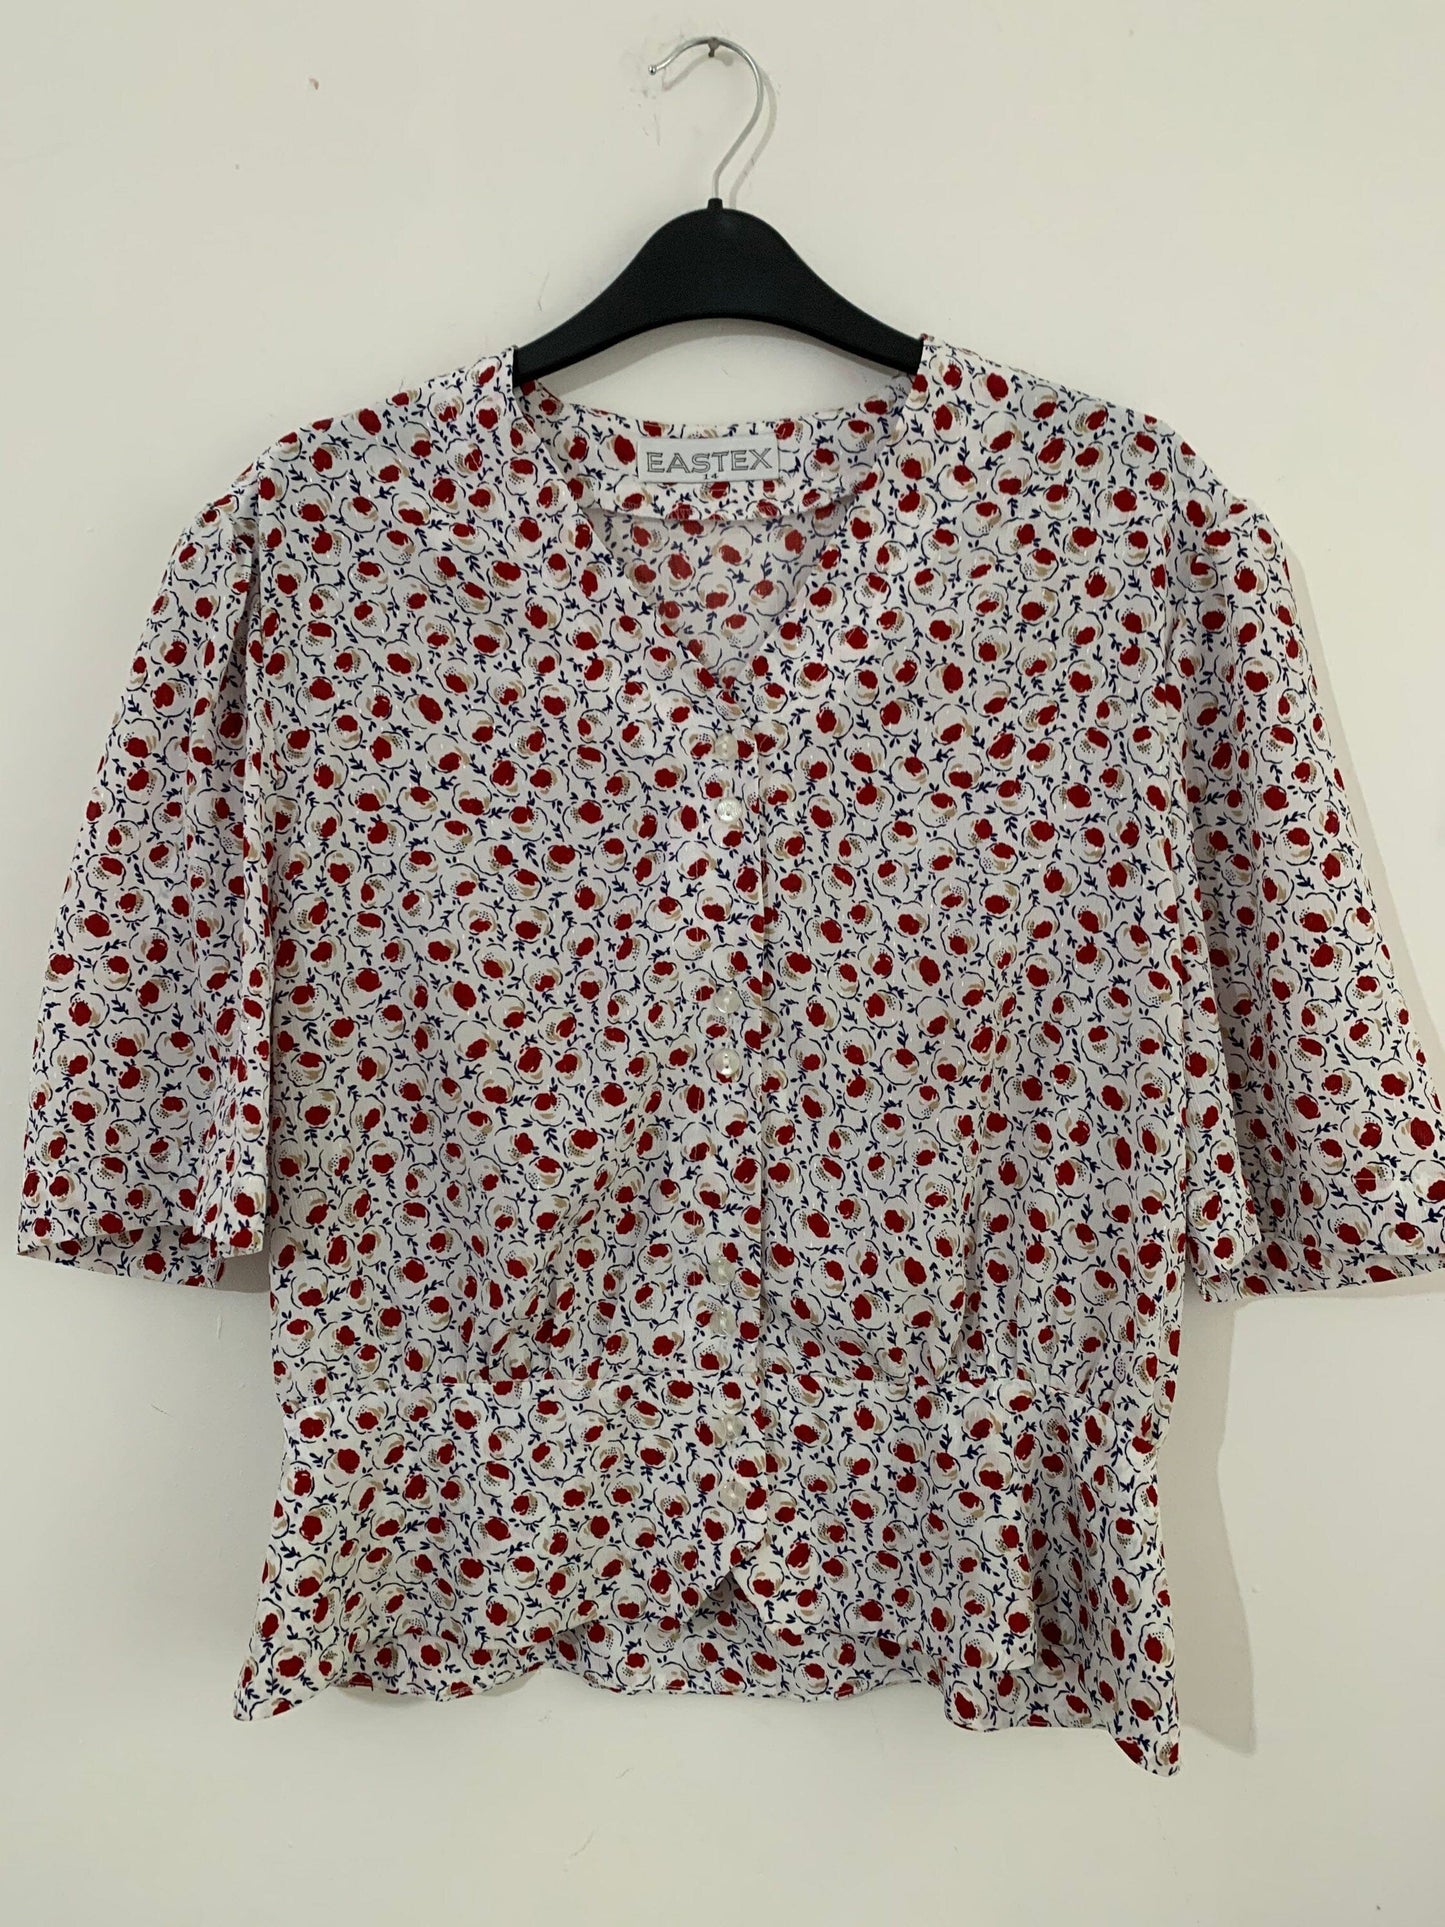 Navy, Red and White Vintage Peplum Blouse Floral Pattern Button Through Boxy short Sleeves - Size 14 - Eastex